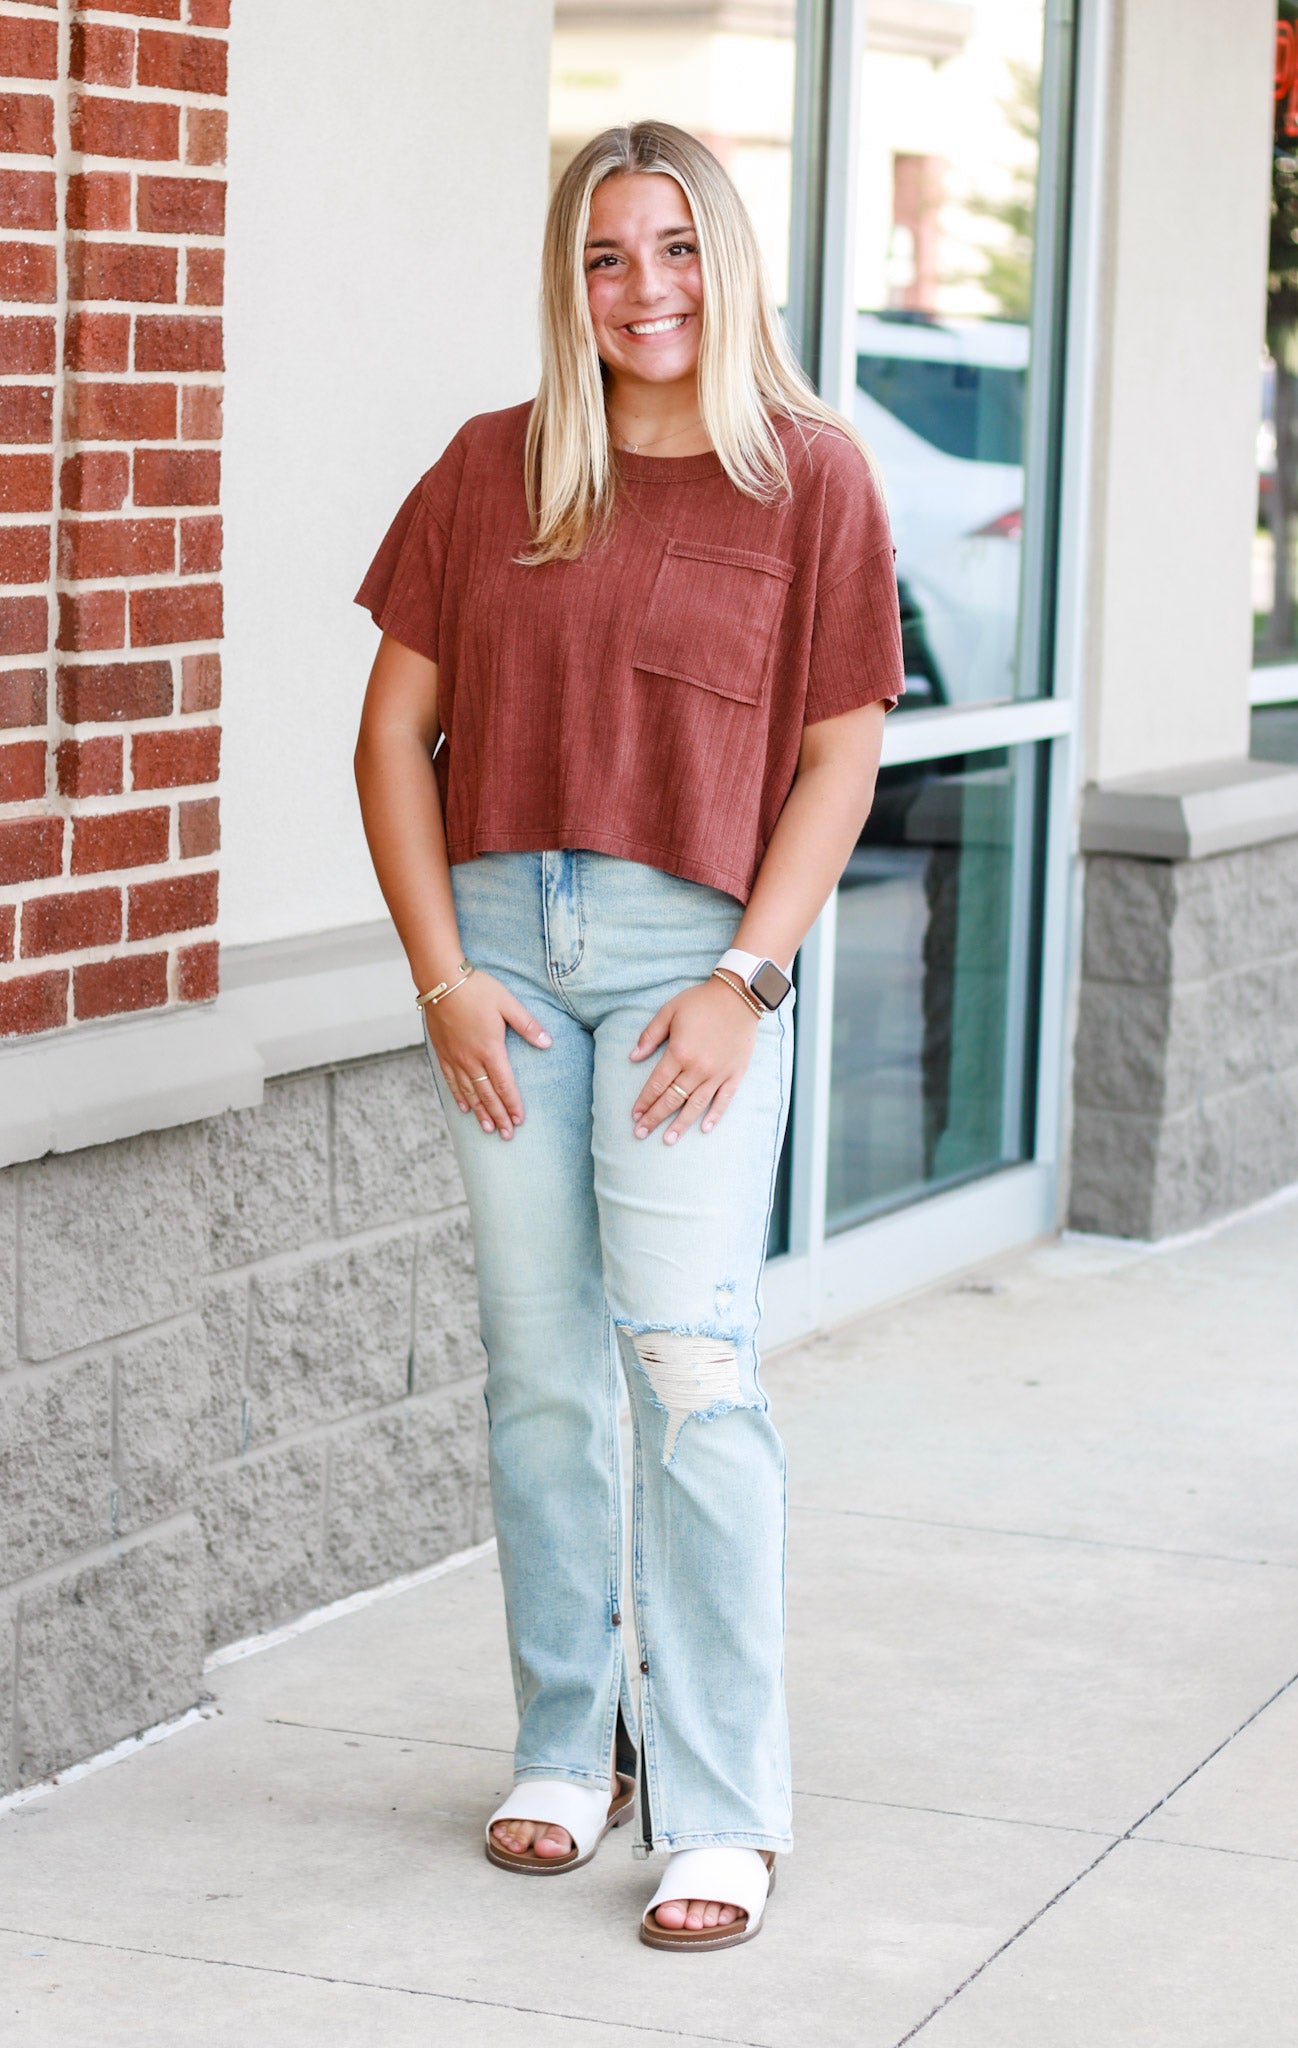 Love the Look Pocket Top in Red Brown